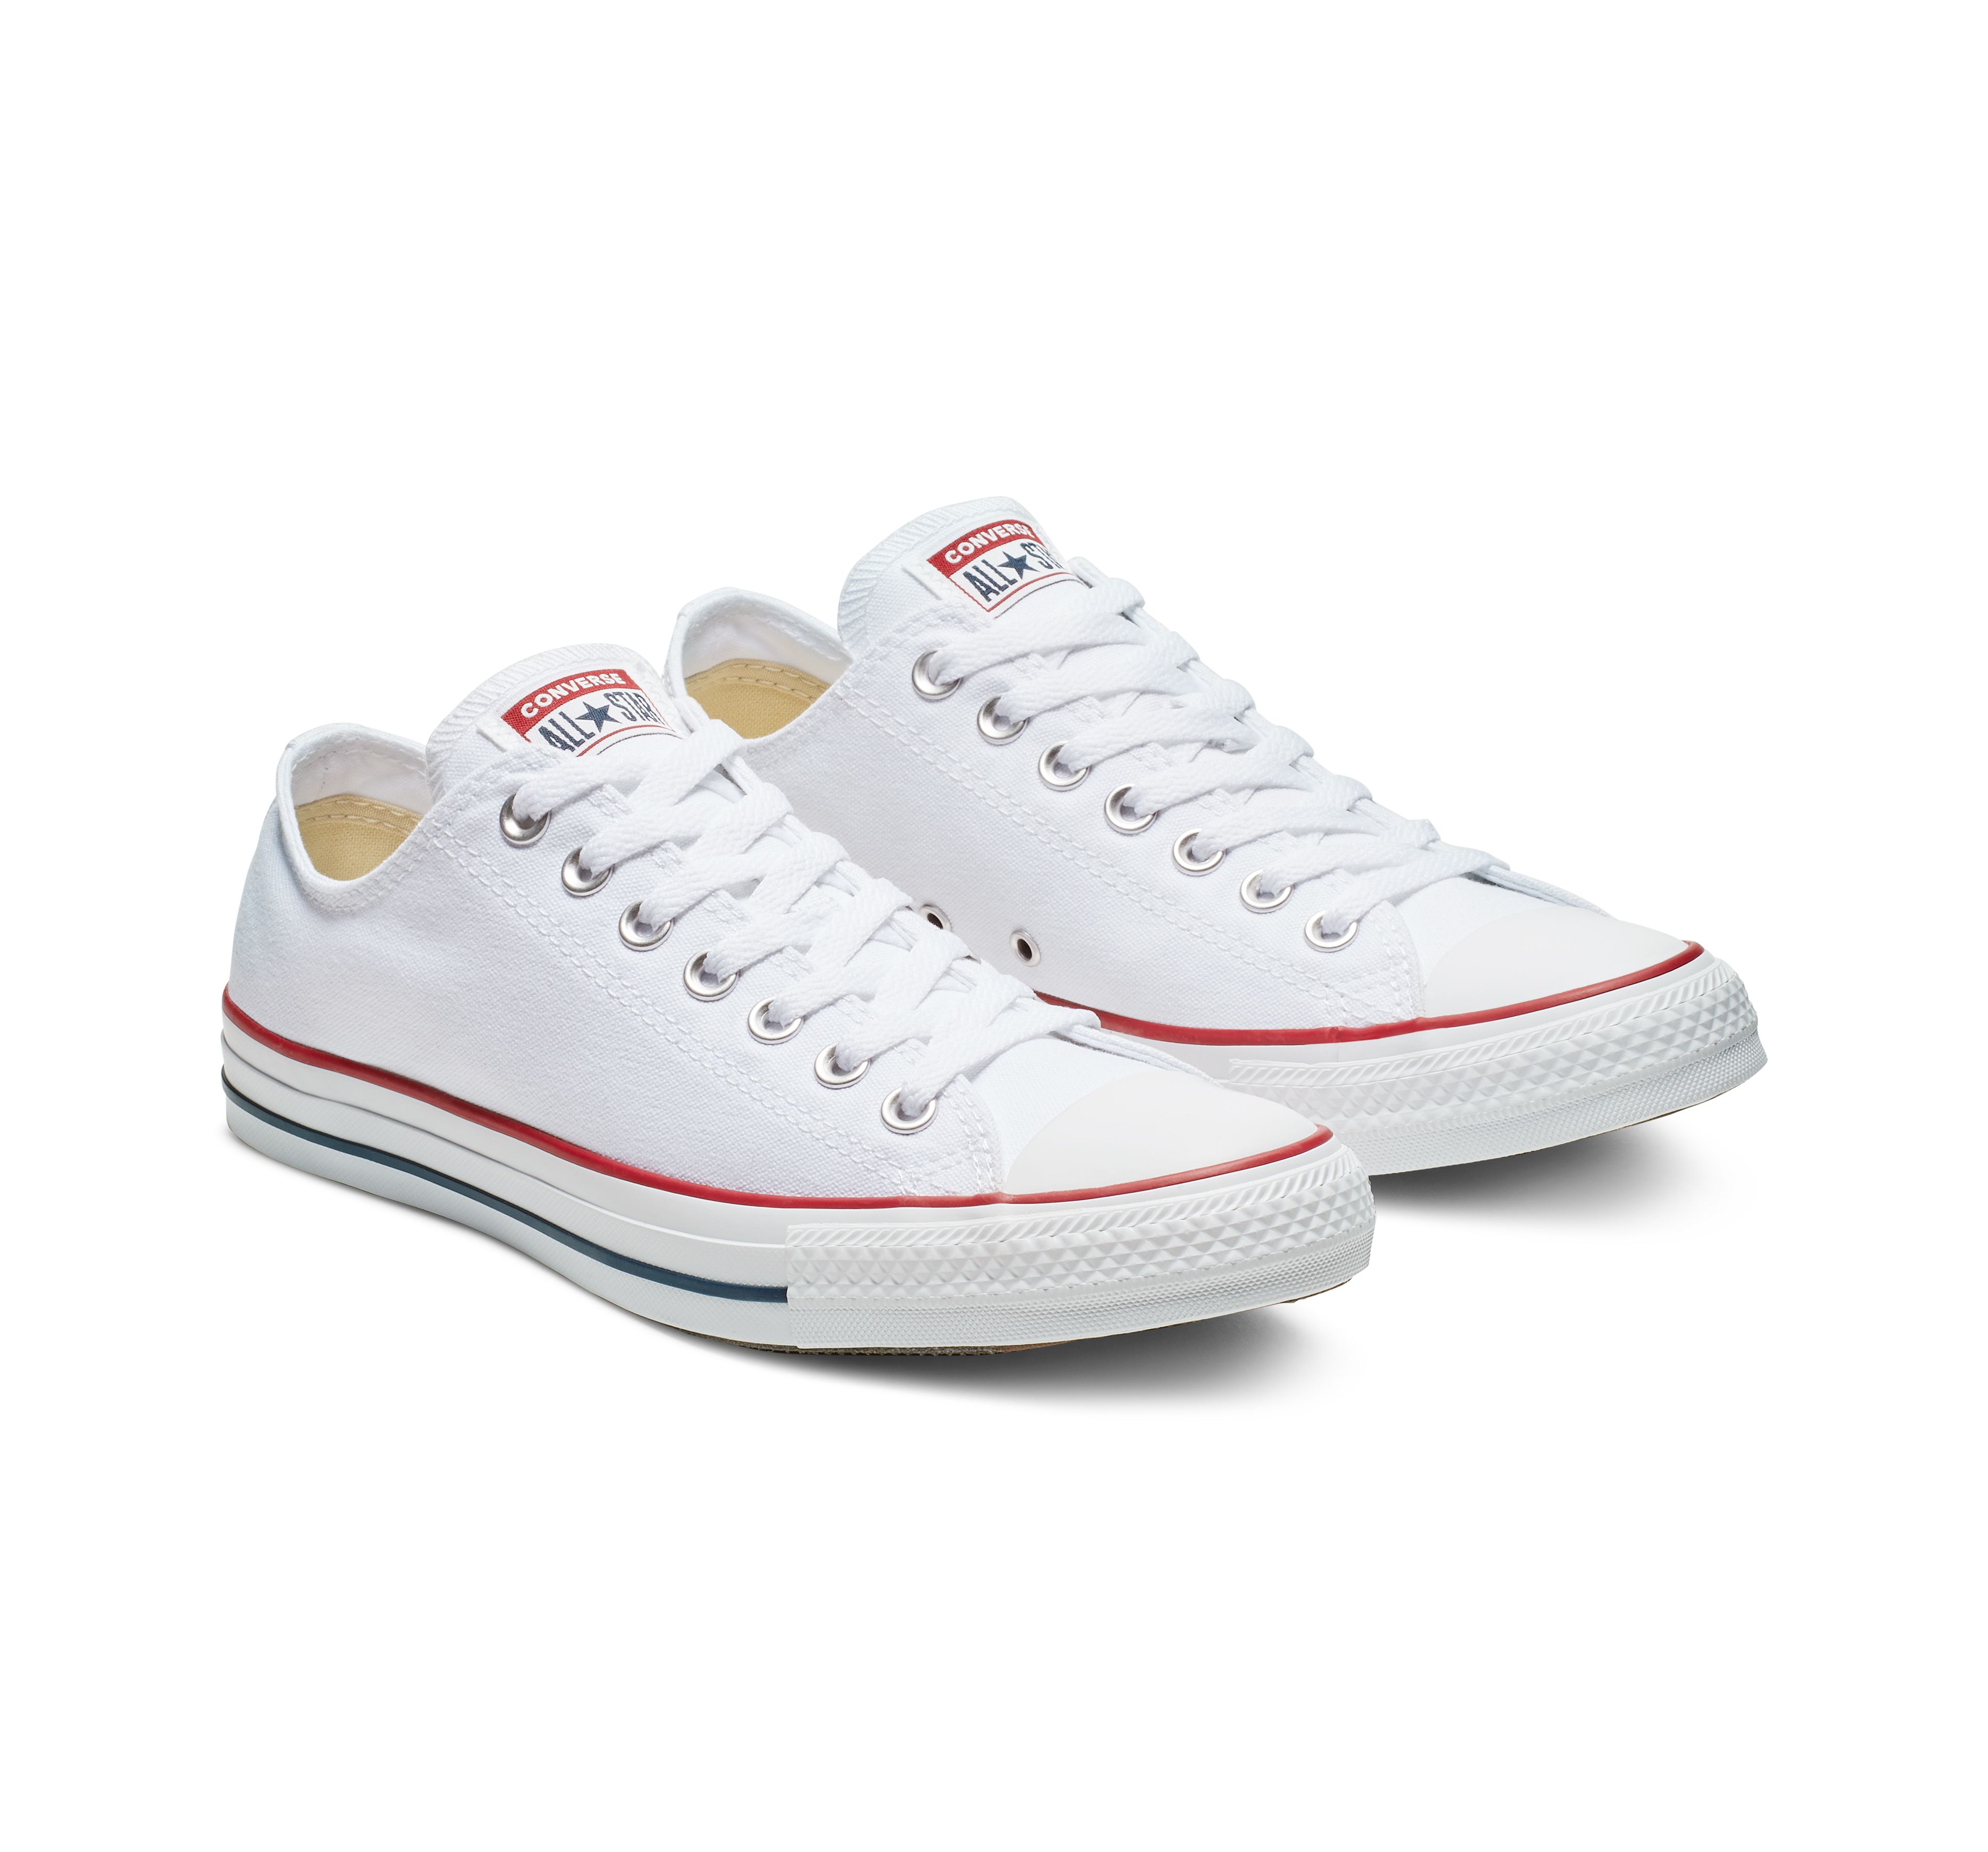 converse chuck taylor low top lean optic white